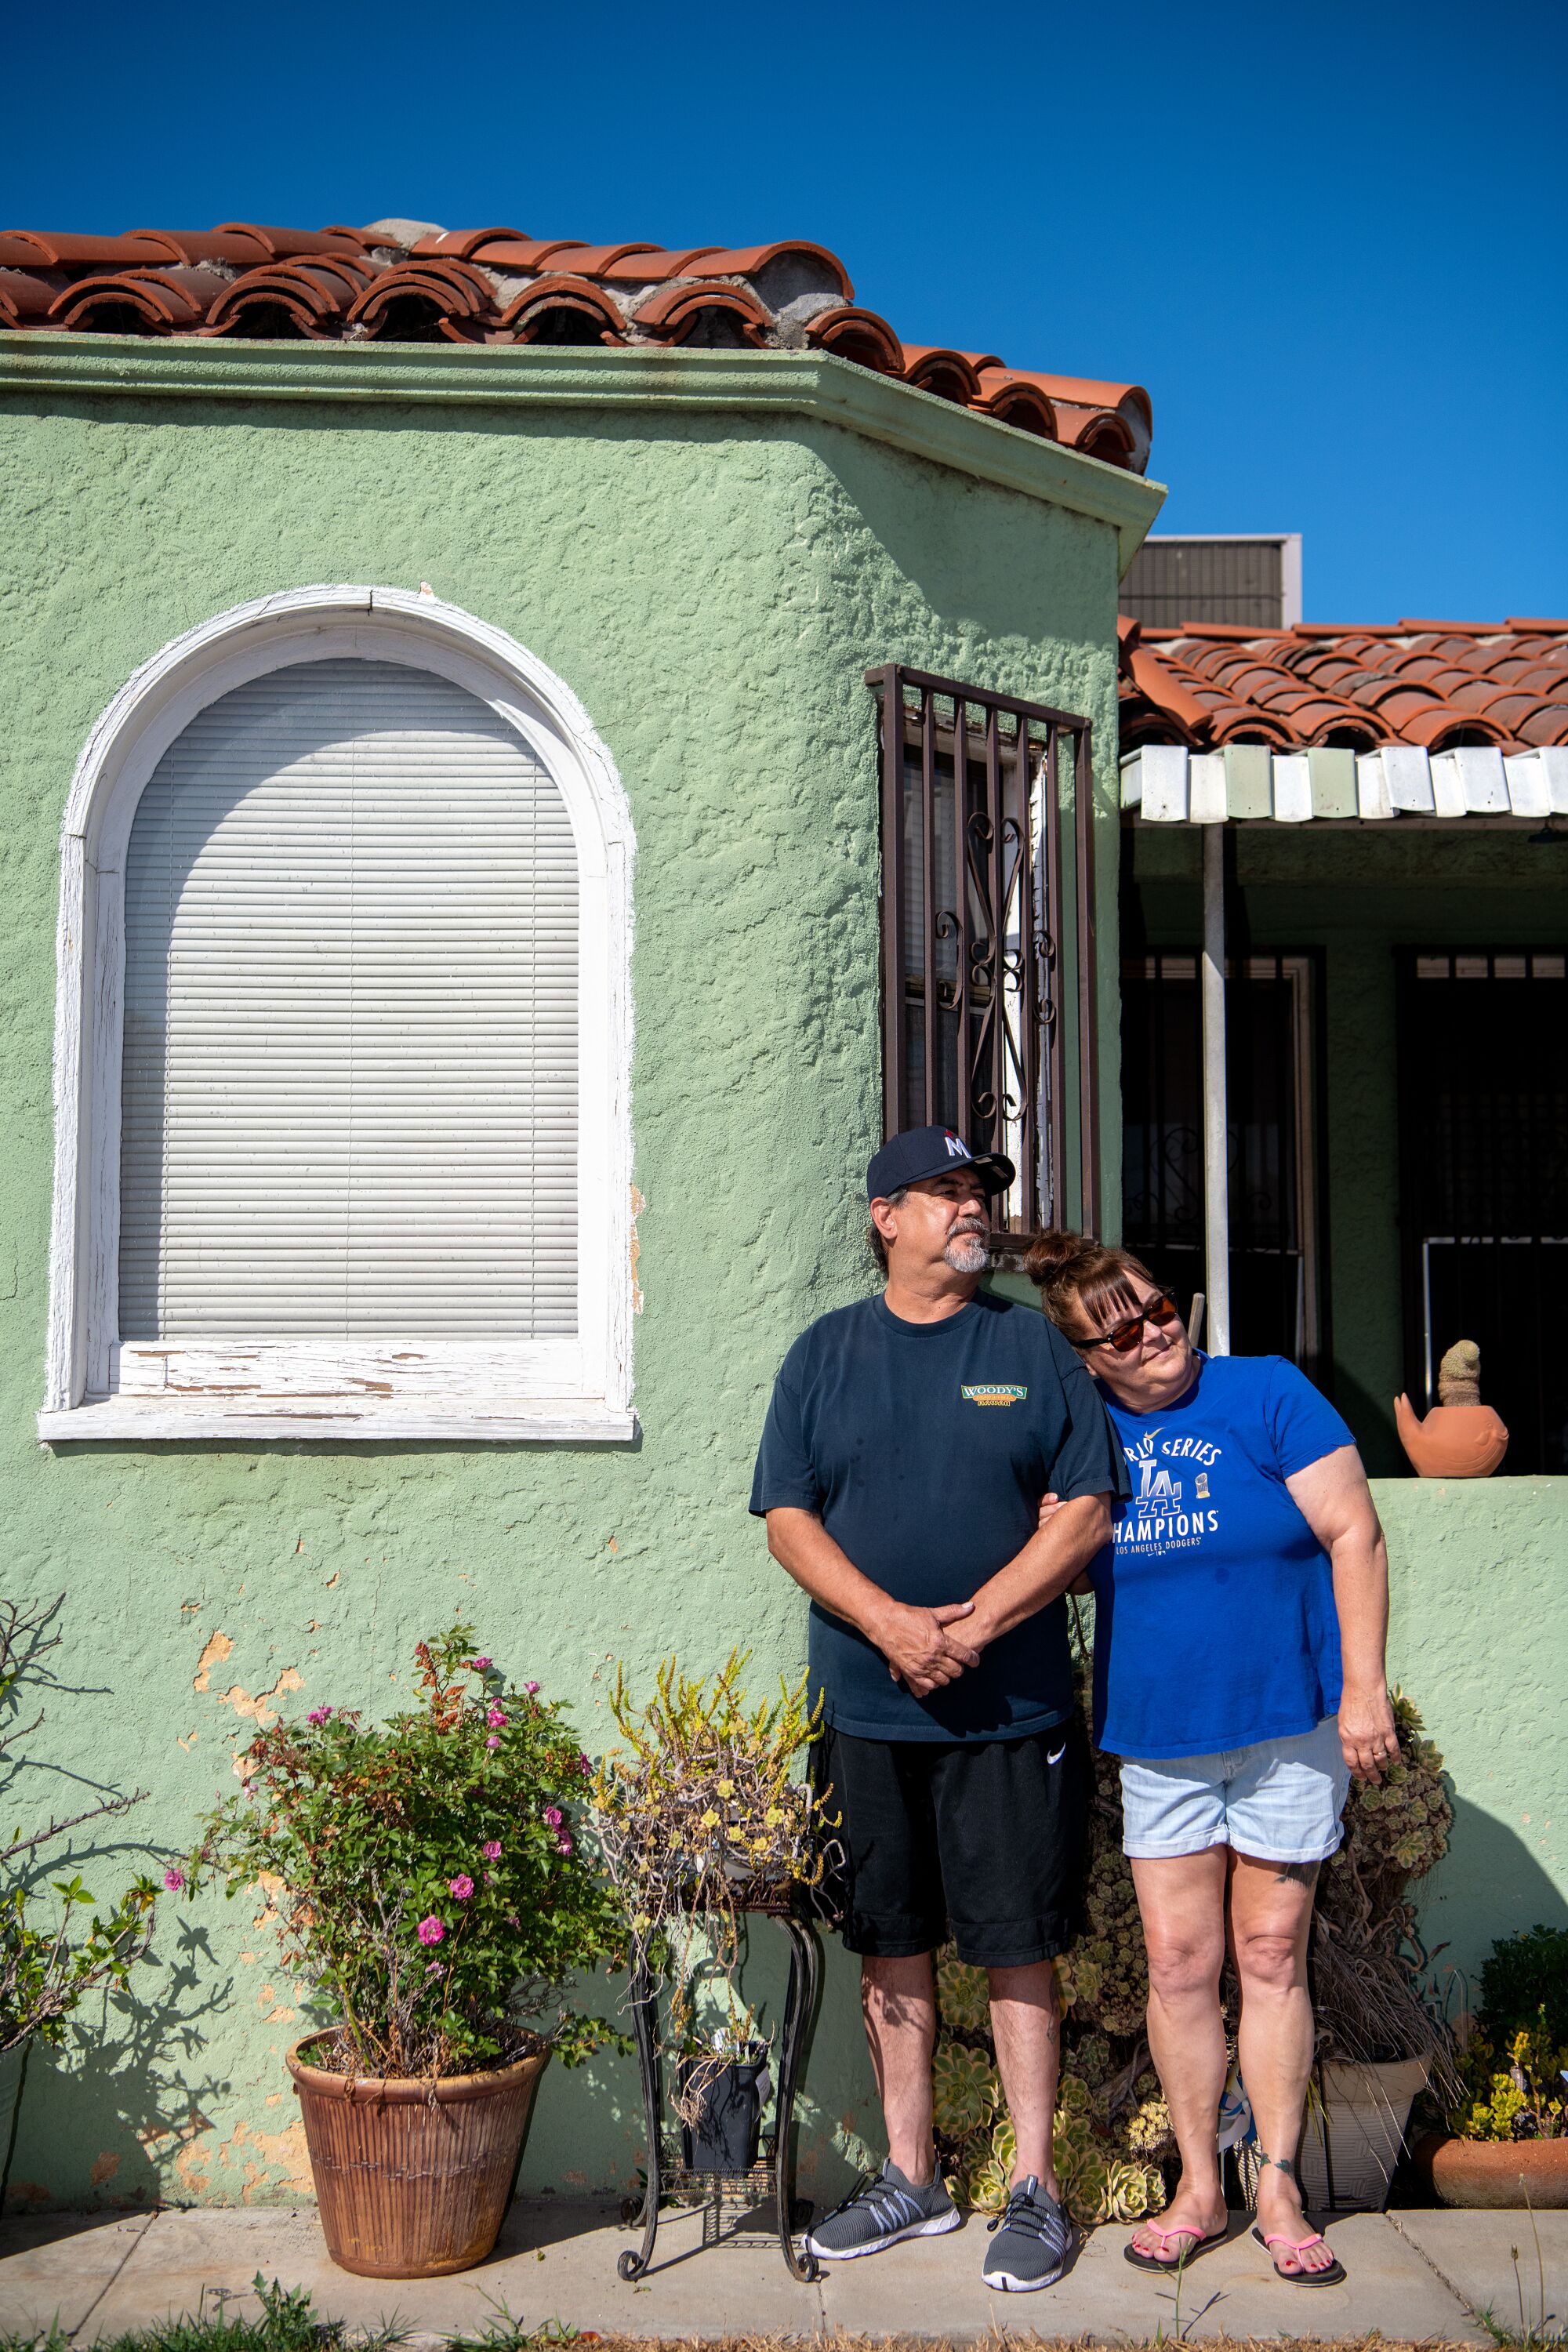 A man and woman stand outside a stucco-walled house with a tile roof.